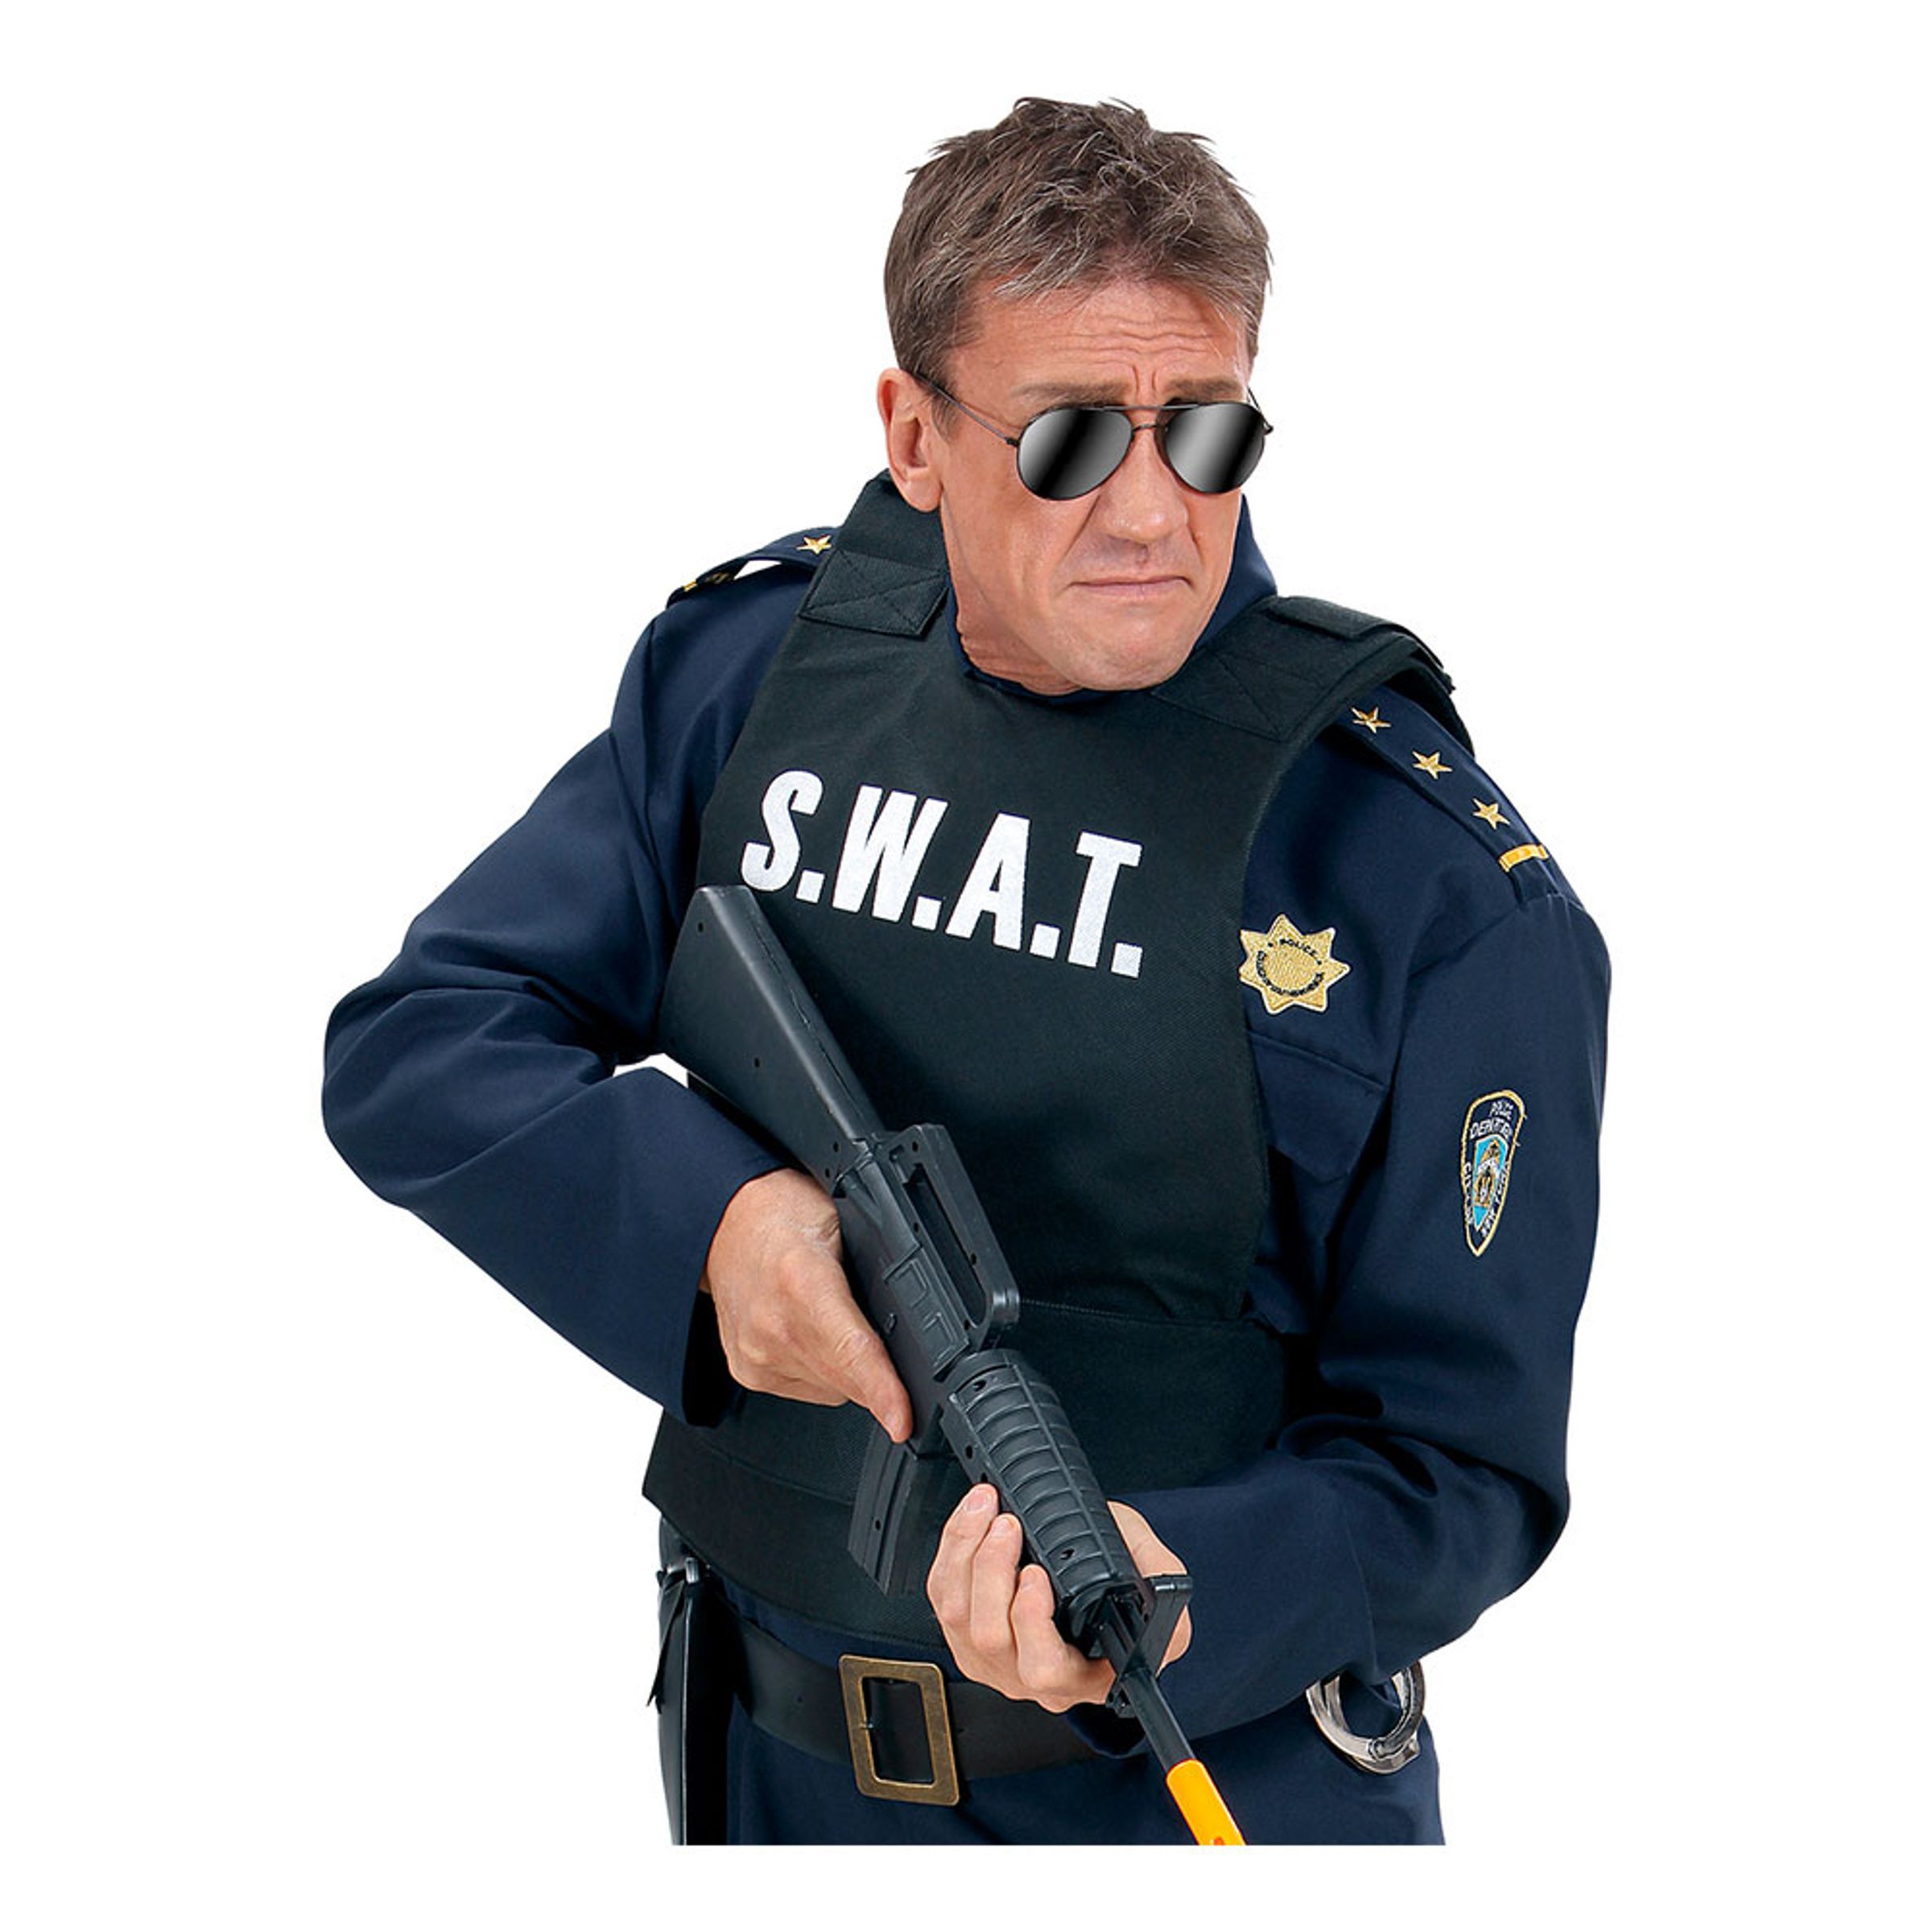 S.W.A.T. Väst - One size